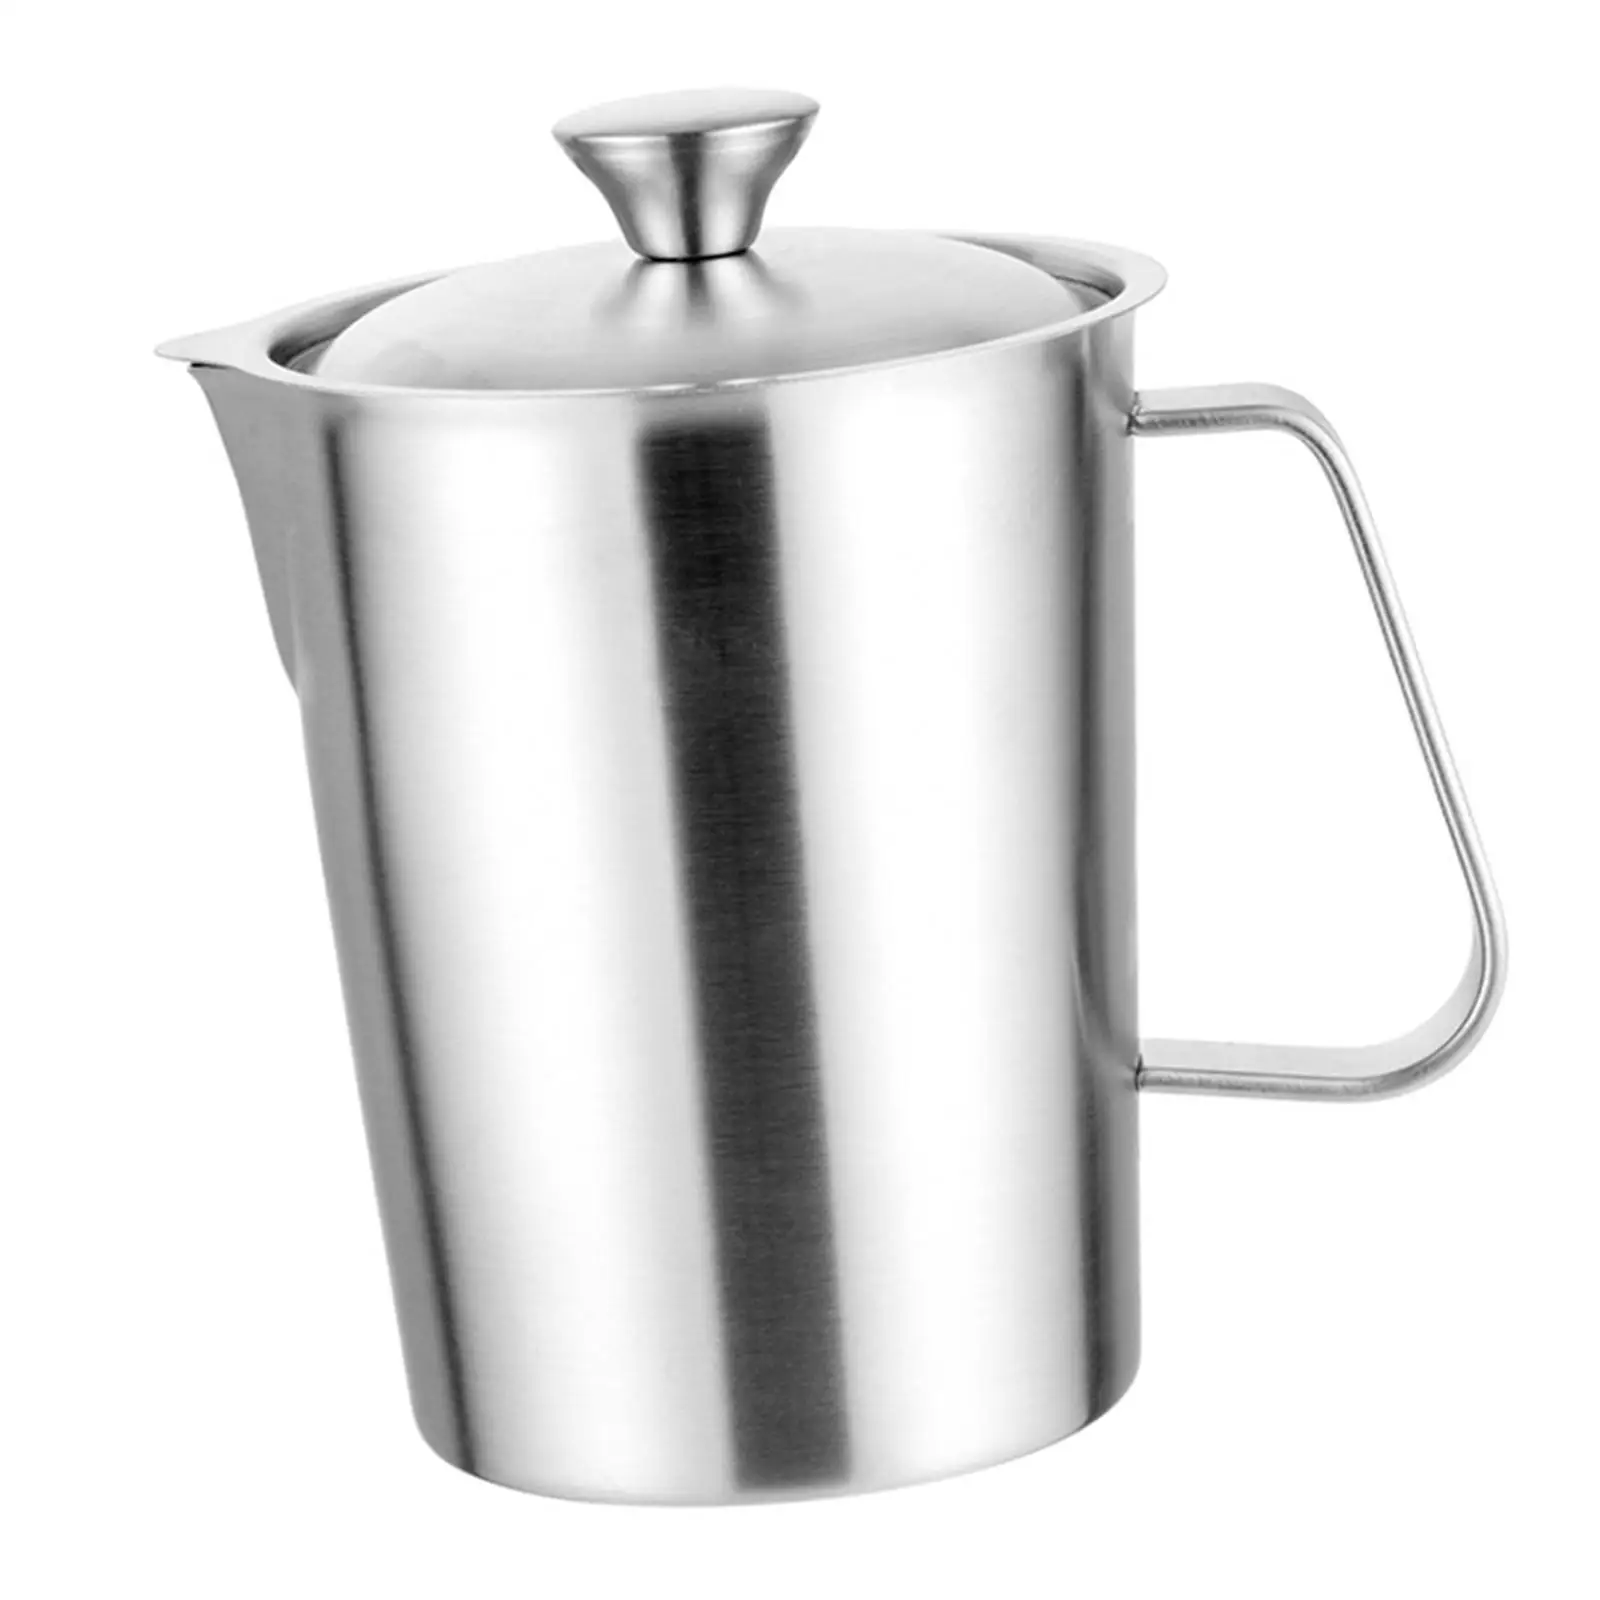 Stainless Steel Milk Frothing Pitcher Milk Frothing Cup Latte Art Jug Tool Milk Jug Cup Barista Steam Pitchers for Milk Shop Bar